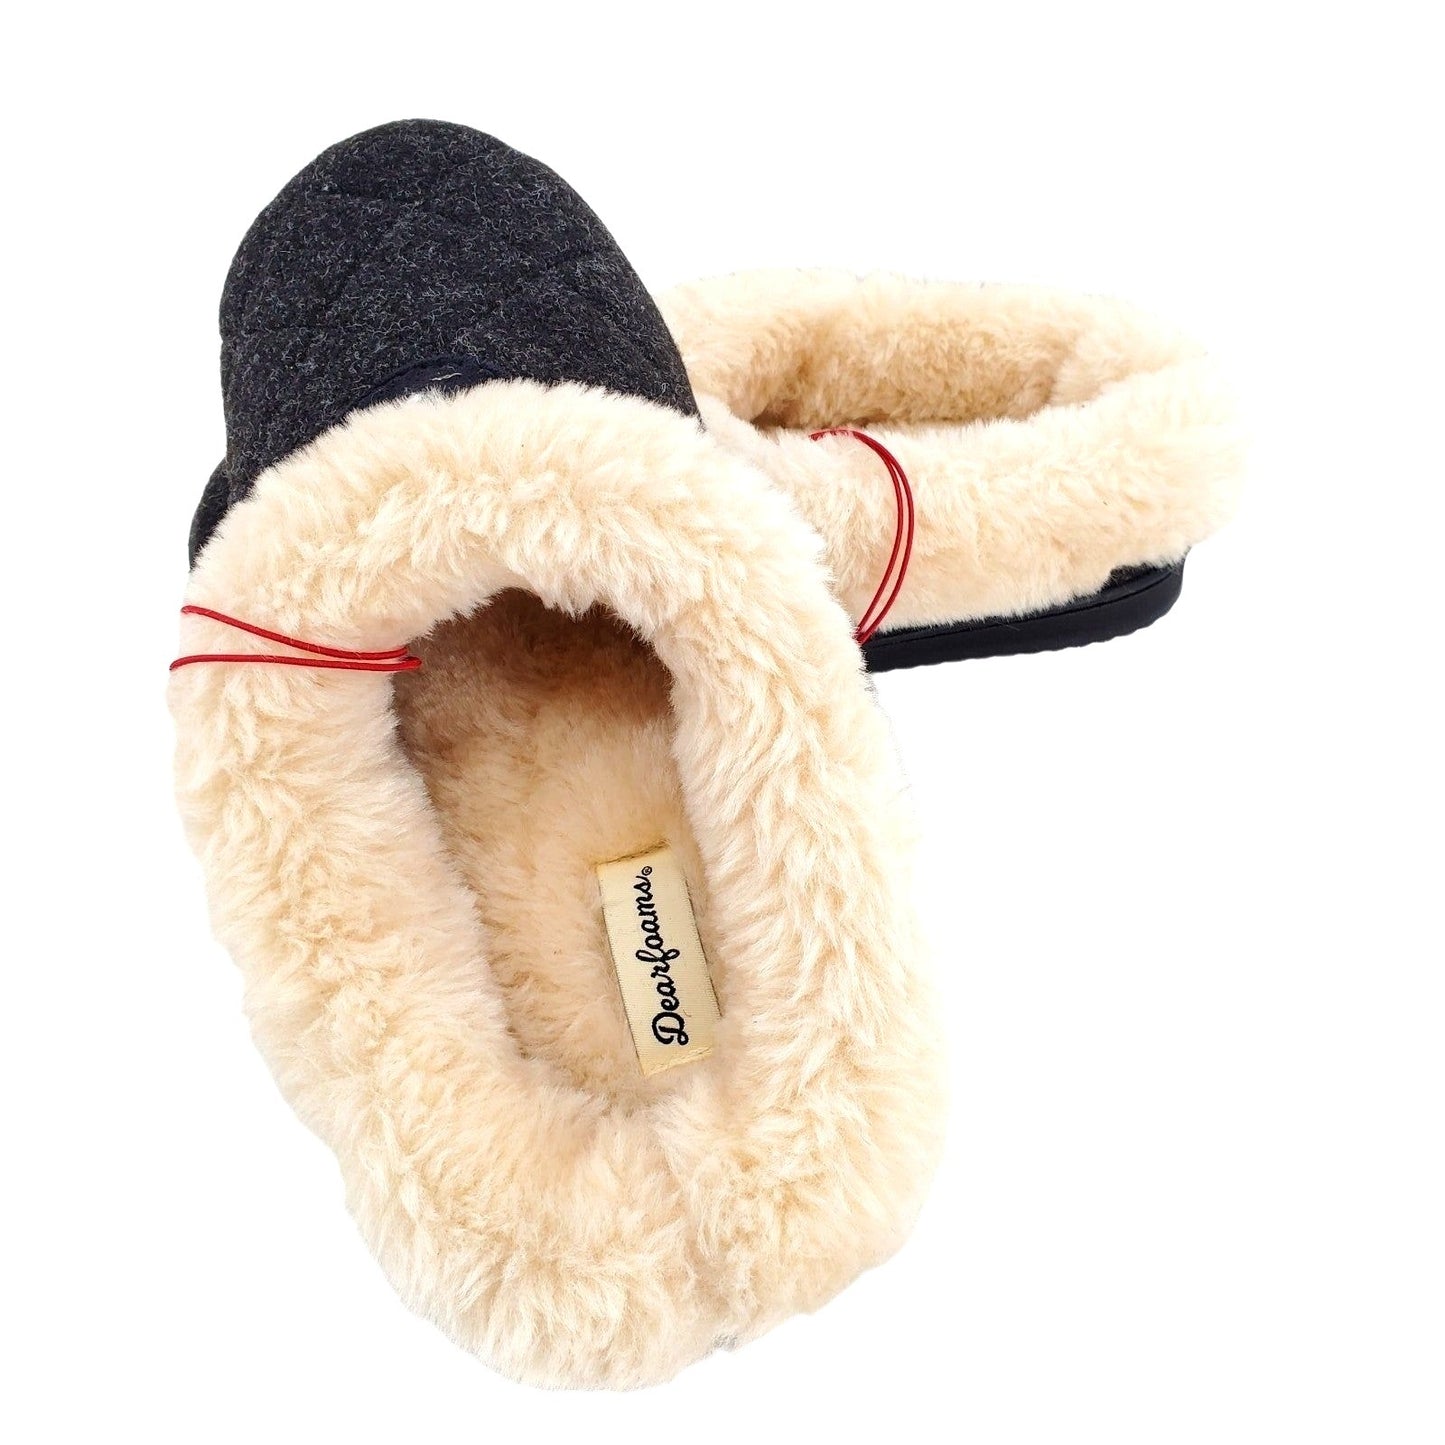 DEARFOAMS Slippers Woman's Slip-on House Shoes Clogs indoor outdoor Wool